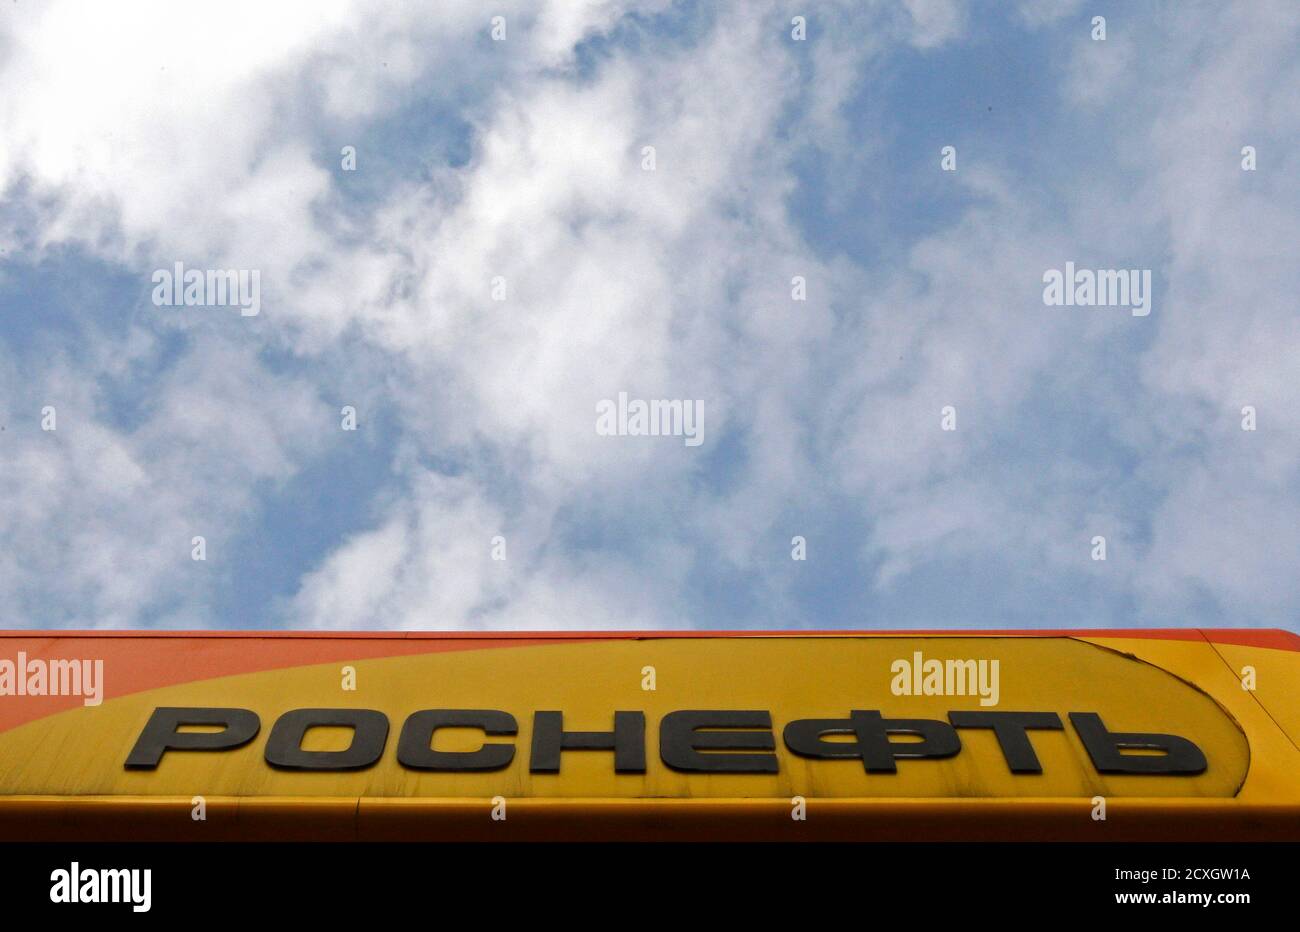 The company logo at a Rosneft petrol station in St.Petersburg October 23, 2012. Russian oil company Rosneft tightened its grip on Russia's oil industry on Monday with a $55 billion deal to buy TNK-BP that also makes Britain's BP a one-fifth shareholder in the state-controlled company.  REUTERS/Alexander Demianchuk (RUSSIA - Tags: BUSINESS ENERGY LOGO) Stock Photo